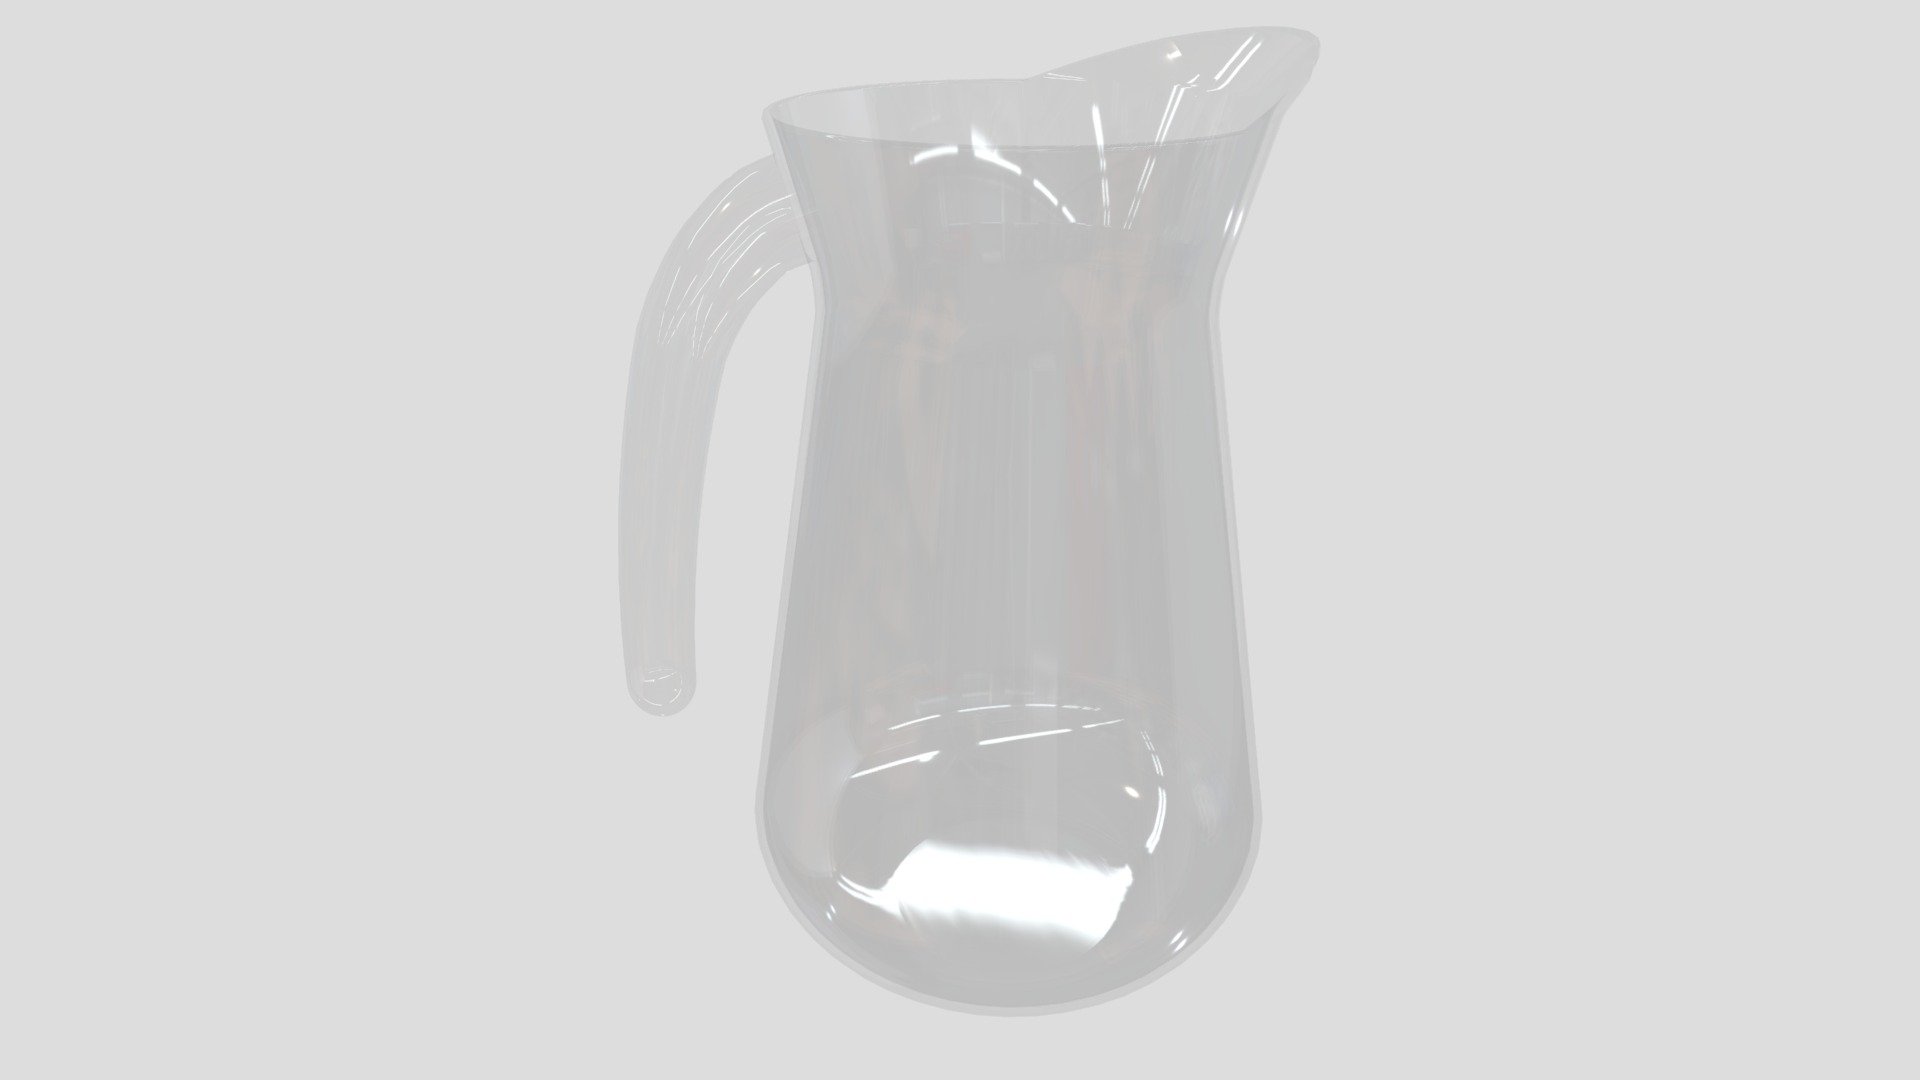 Glass jug for liquid made in SketchUp Pro 2021 3d model